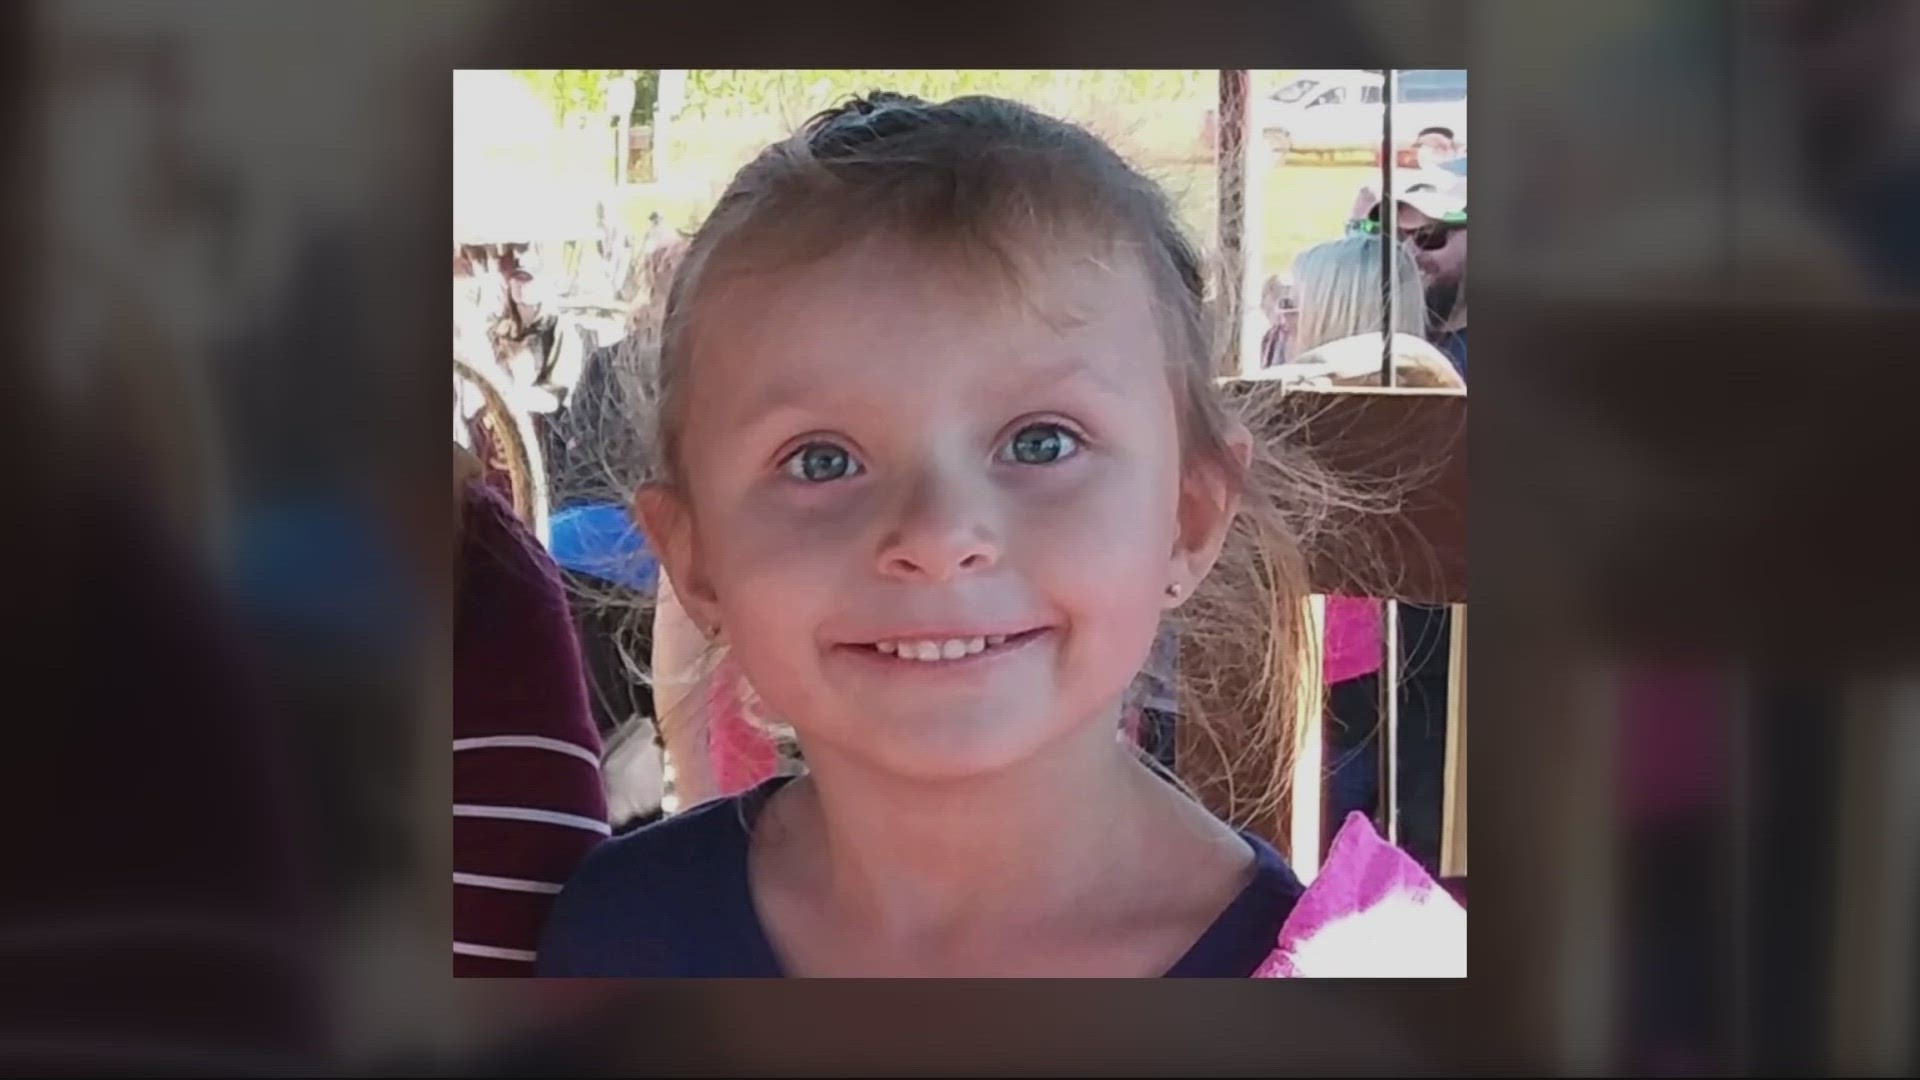 The federal agency indicated that 8-year-old Aranza Ochoa Lopez was located in Michoacán, Mexico and has been brought back to an undisclosed location in the U.S.